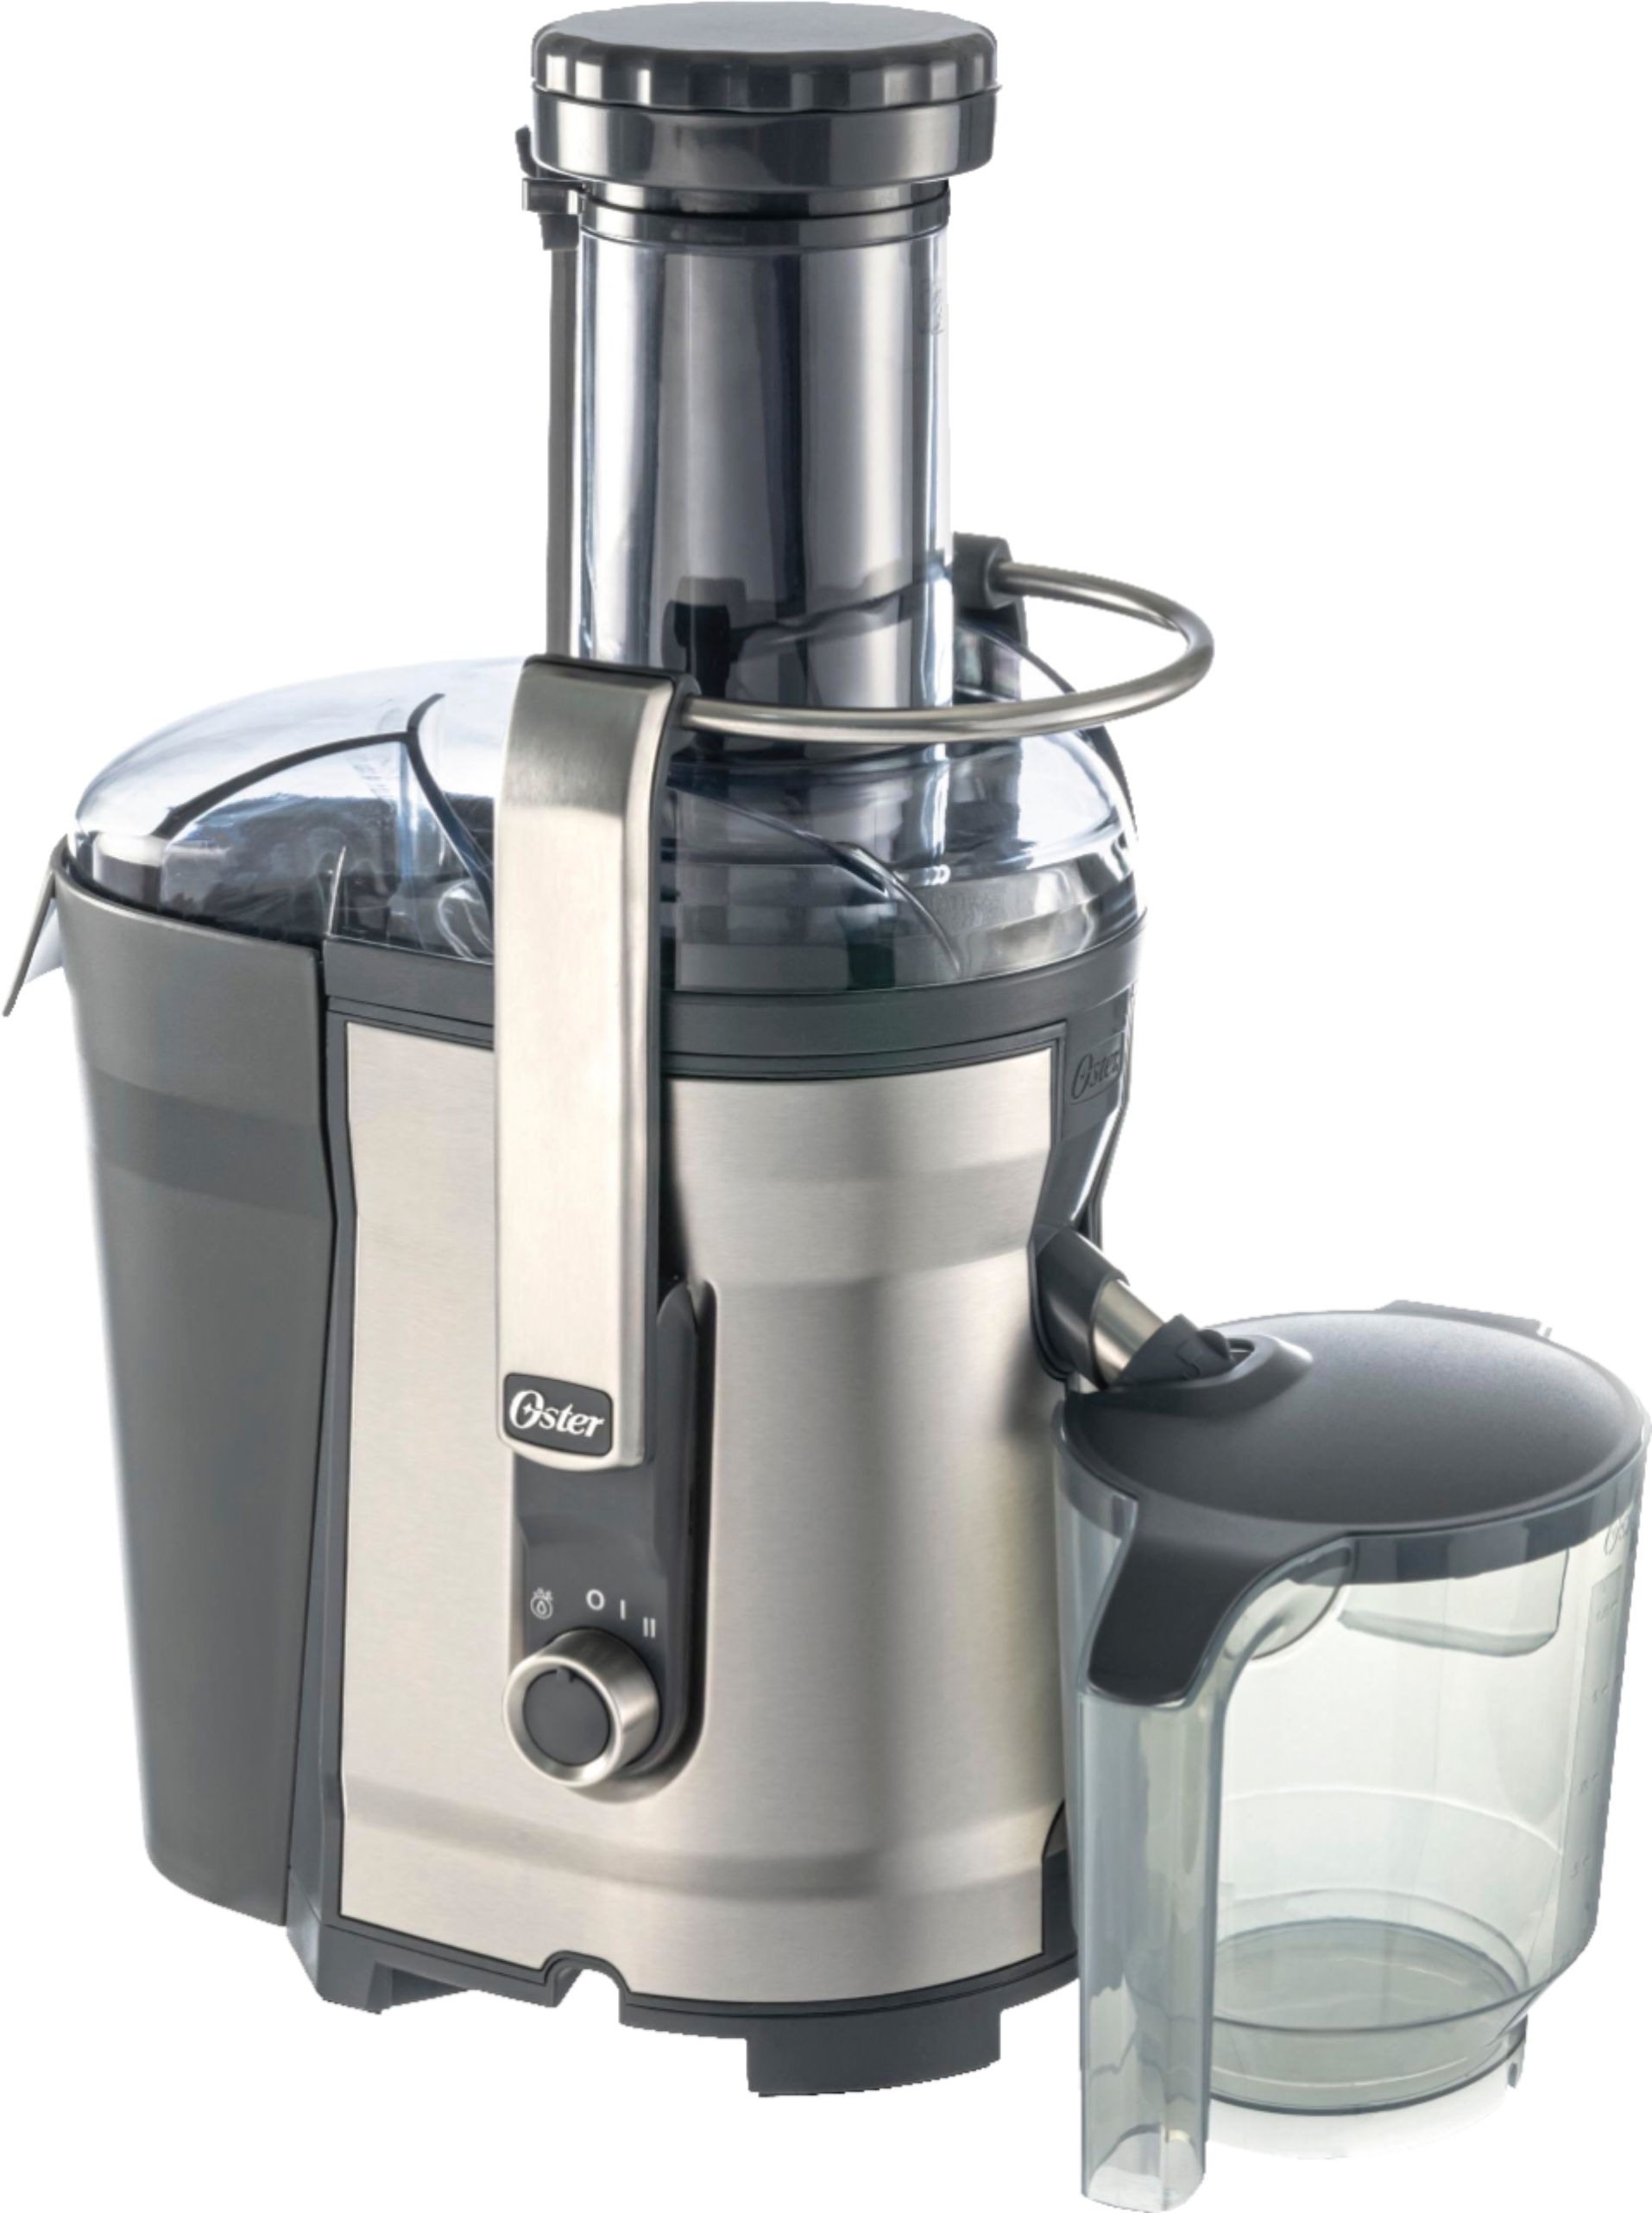 12 Best Juicers for 2023, According to Food Experts - Parade